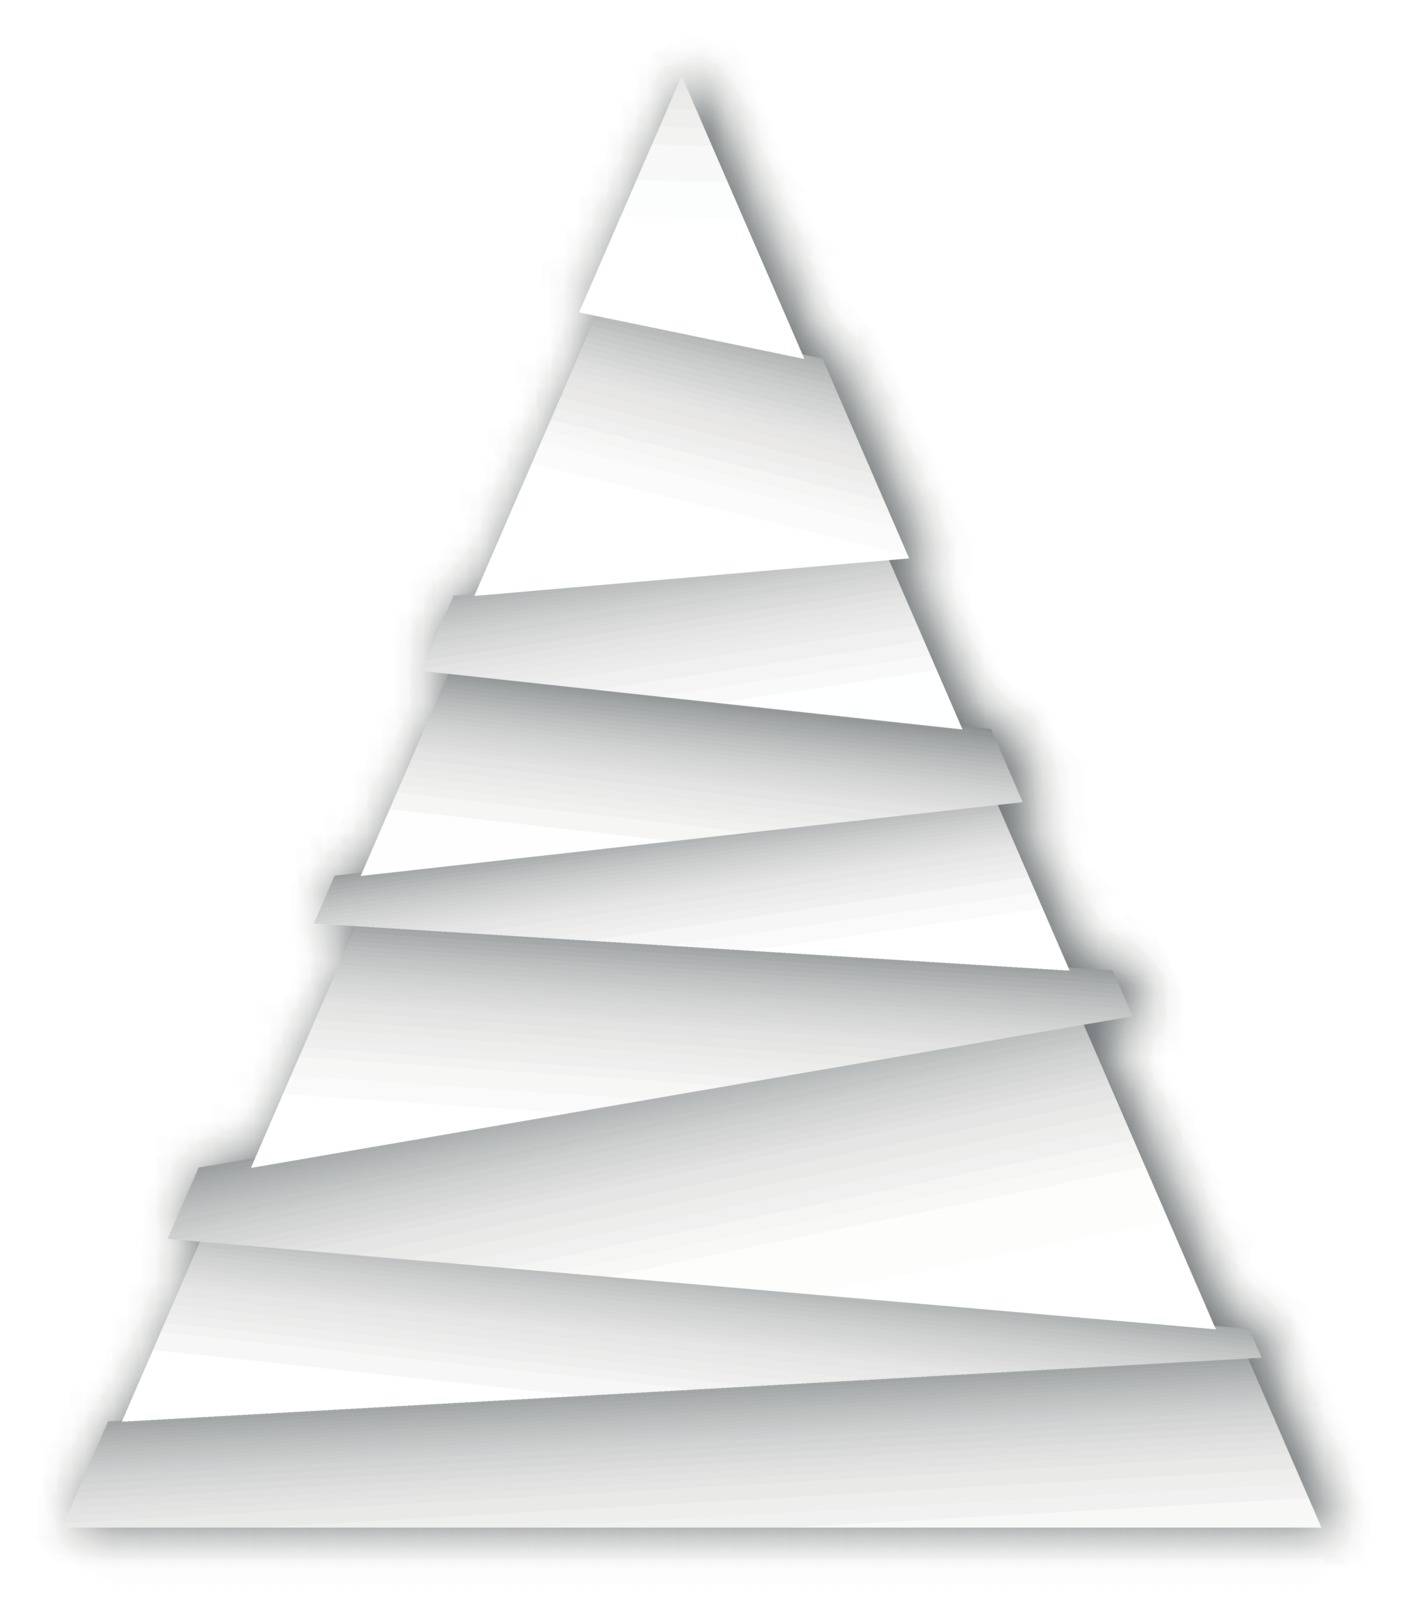 Christmas tree of white layered triangles on white background. 3D vector illustration with dropped shadow.